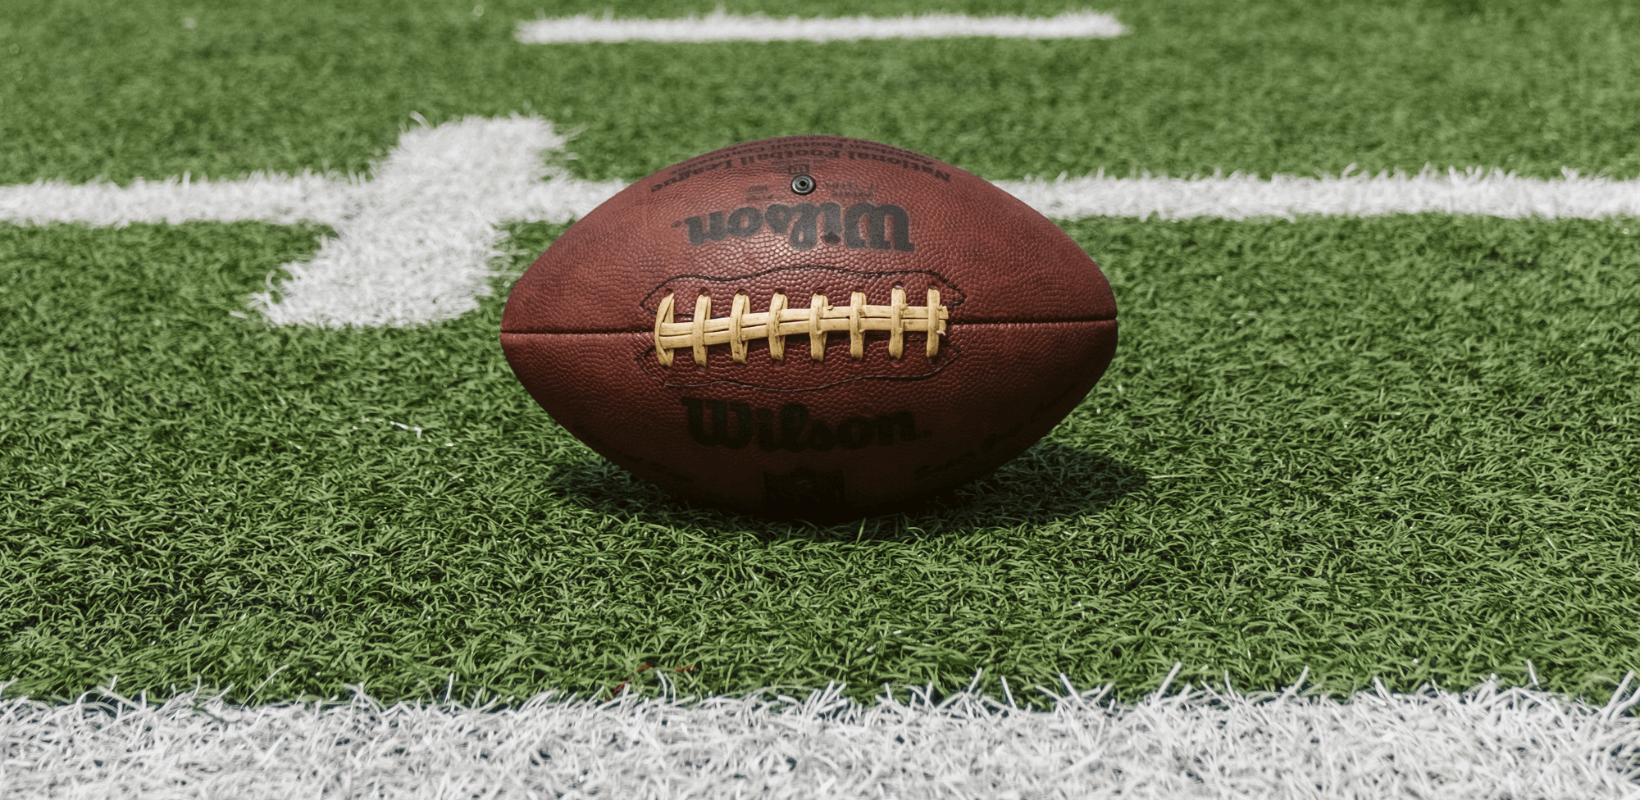 Super Bowl Marketing: 7 Tactics To Help You Attract New Customers